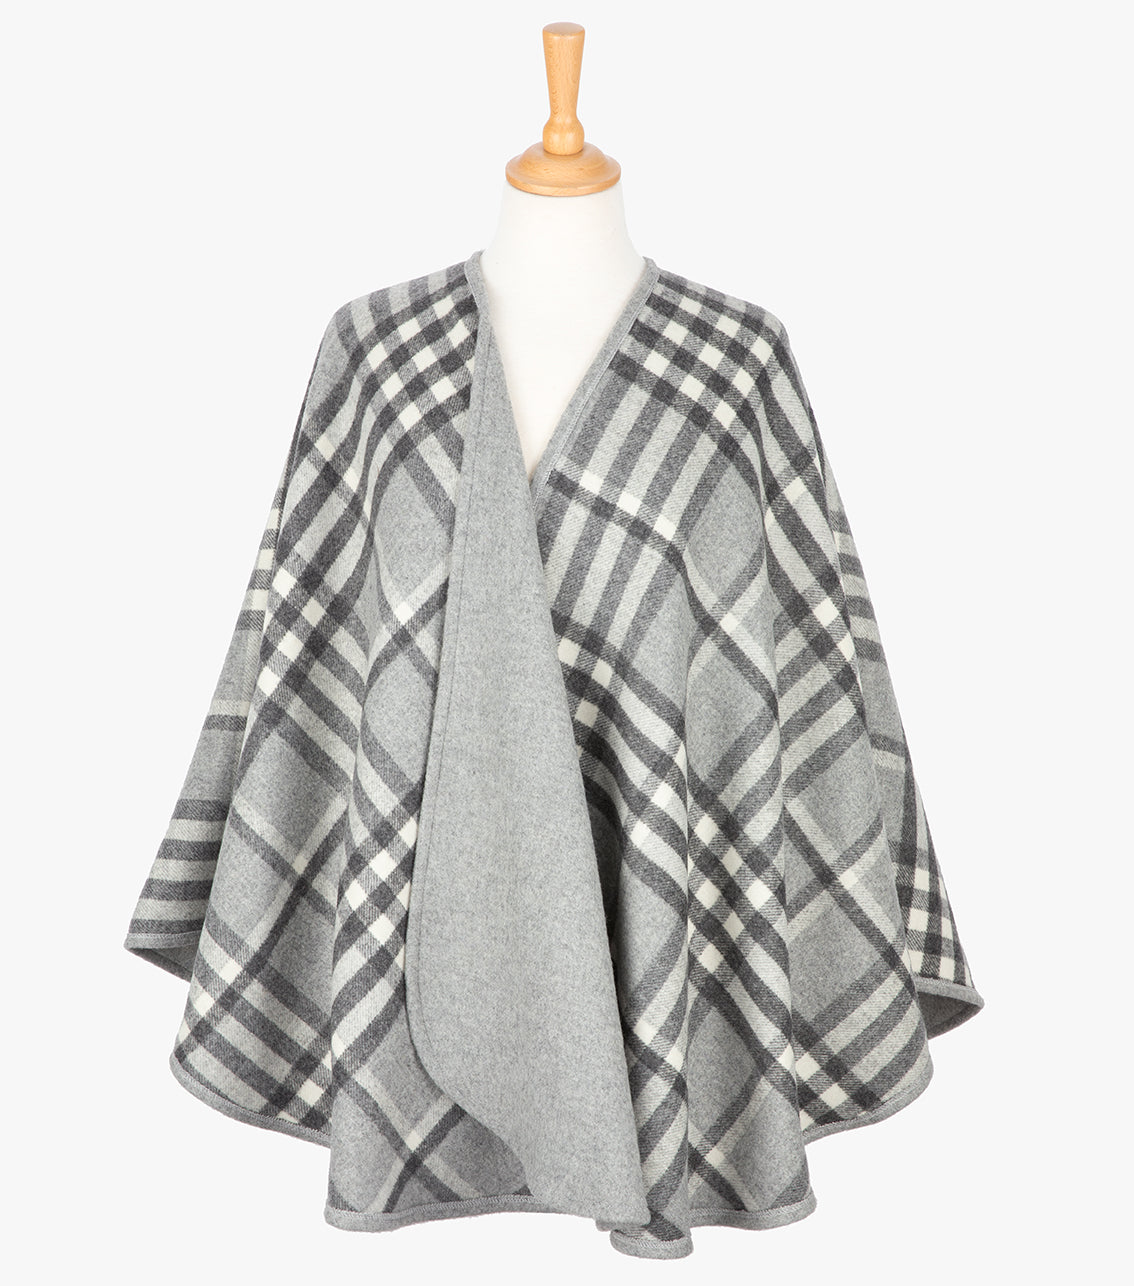 Reversible Wool and Cashmere serape/wrap in grey check it is grey on one side and a grey check on the reverse as shown.